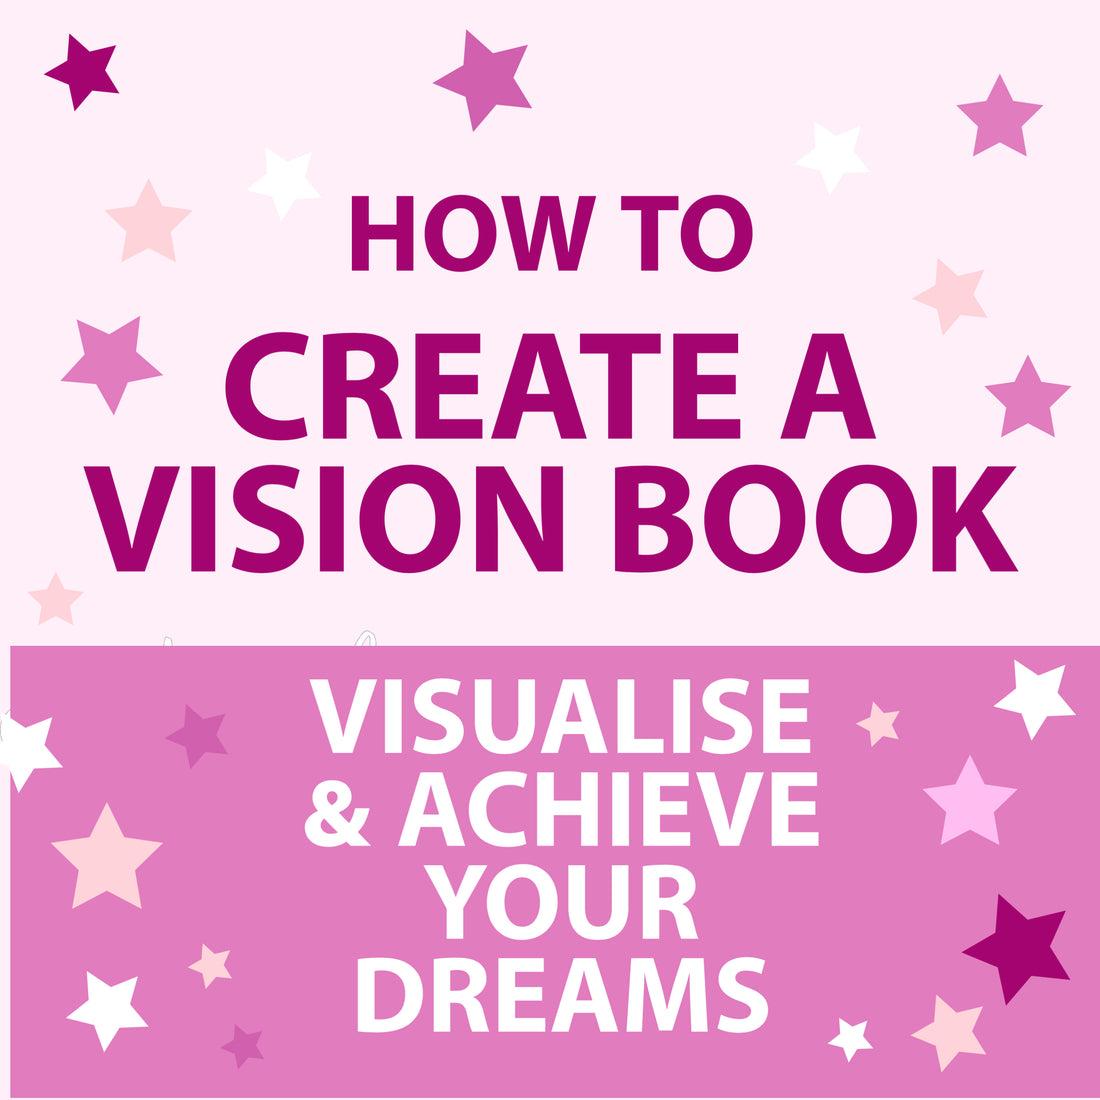 HOW TO CREATE YOUR OWN VISION BOOK